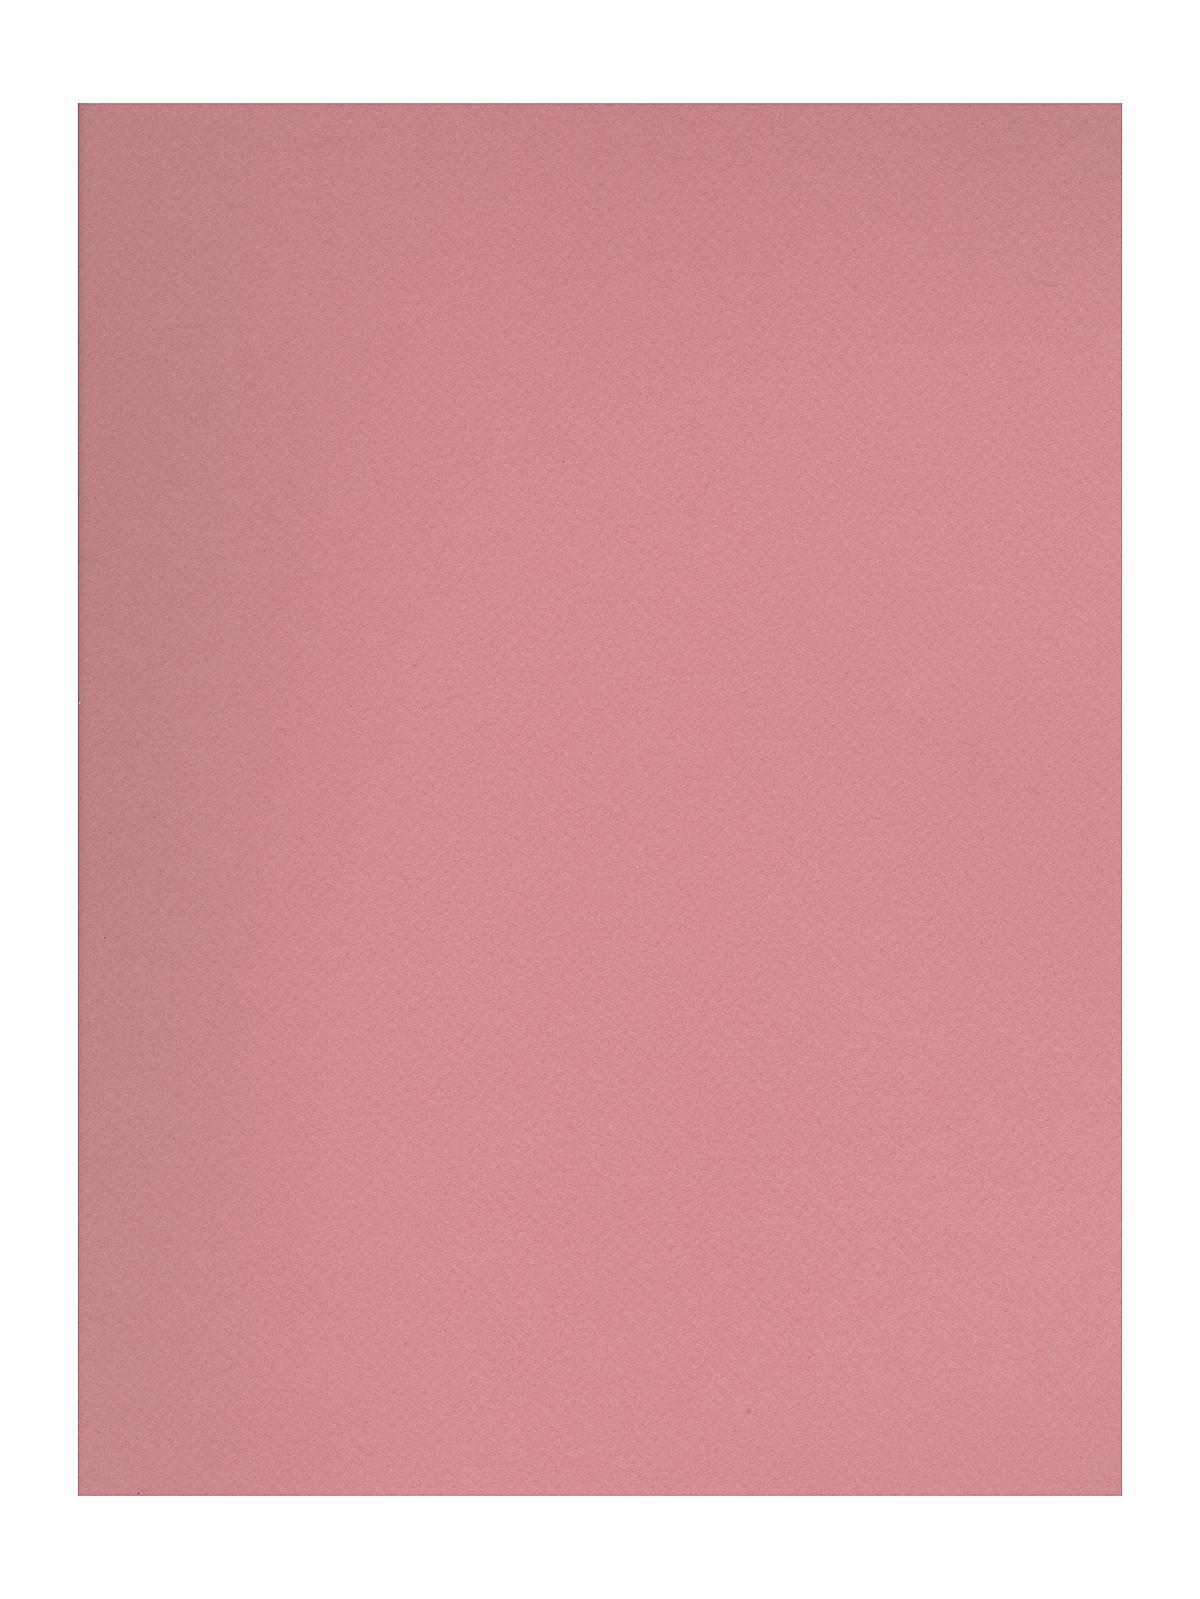 Mi-teintes Tinted Paper Orchid 19 In. X 25 In.